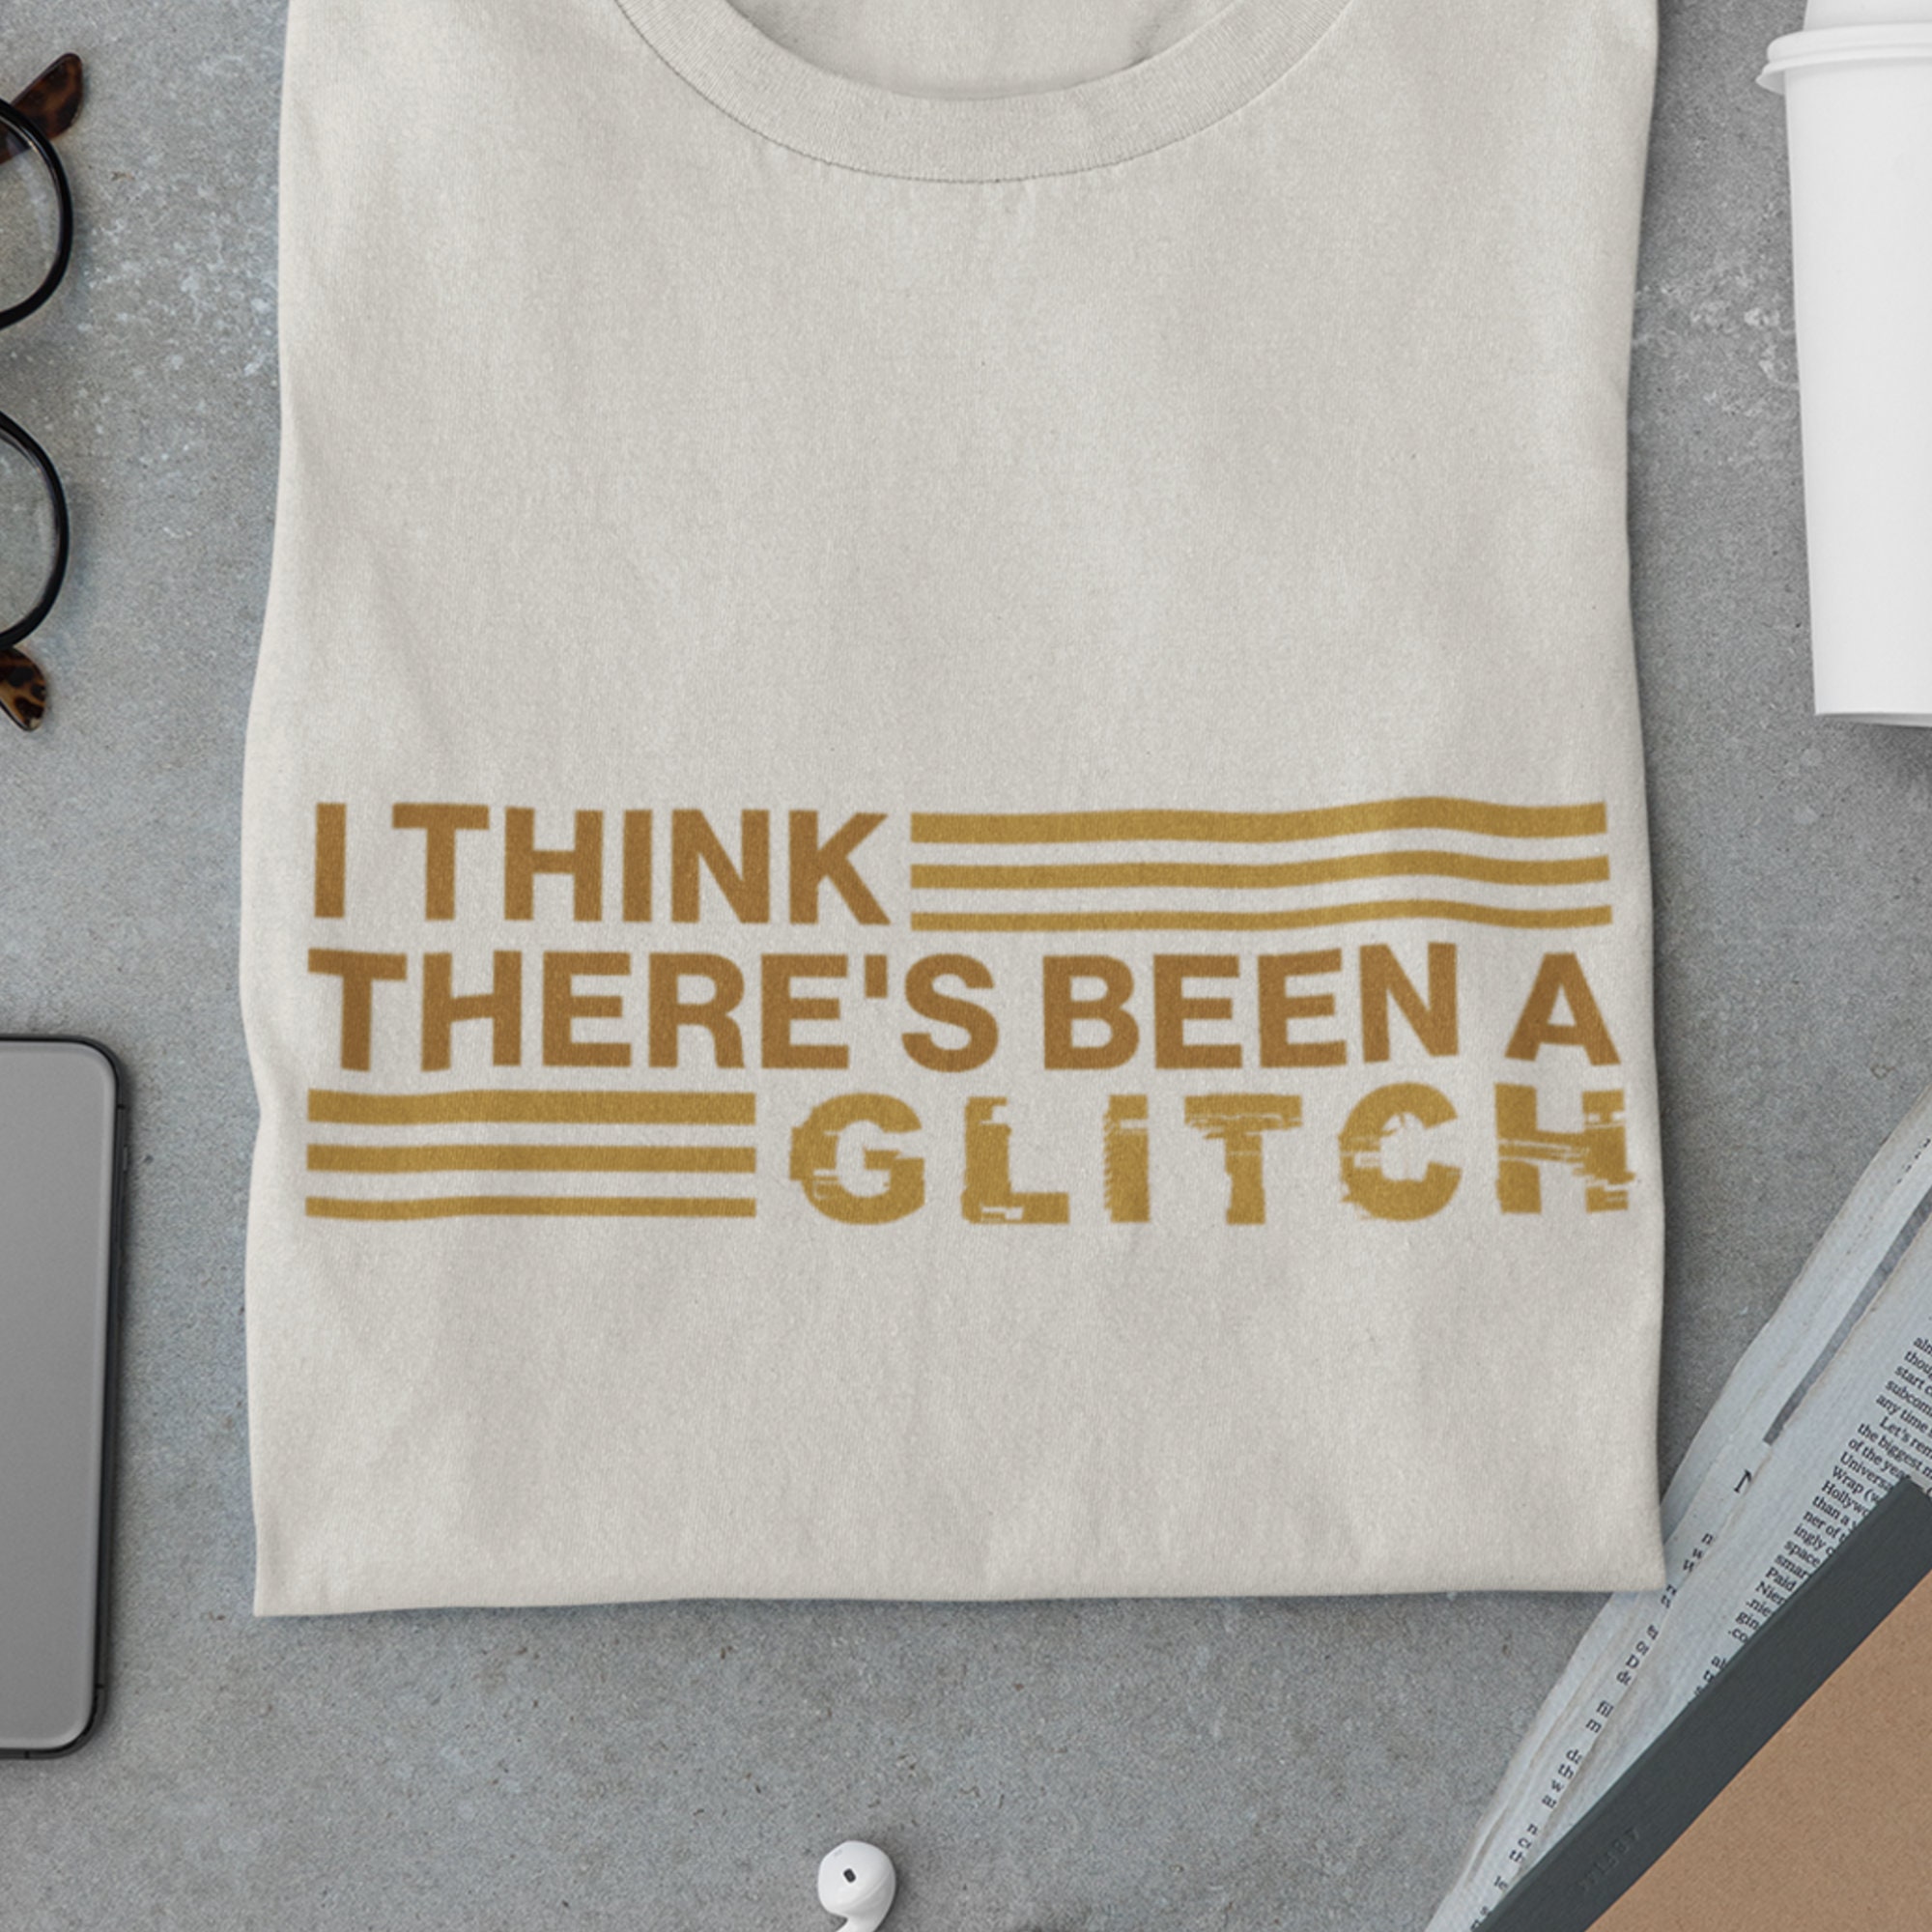 Taylor Swift Glitch Shirt - I Think There's Been a Glitch, T